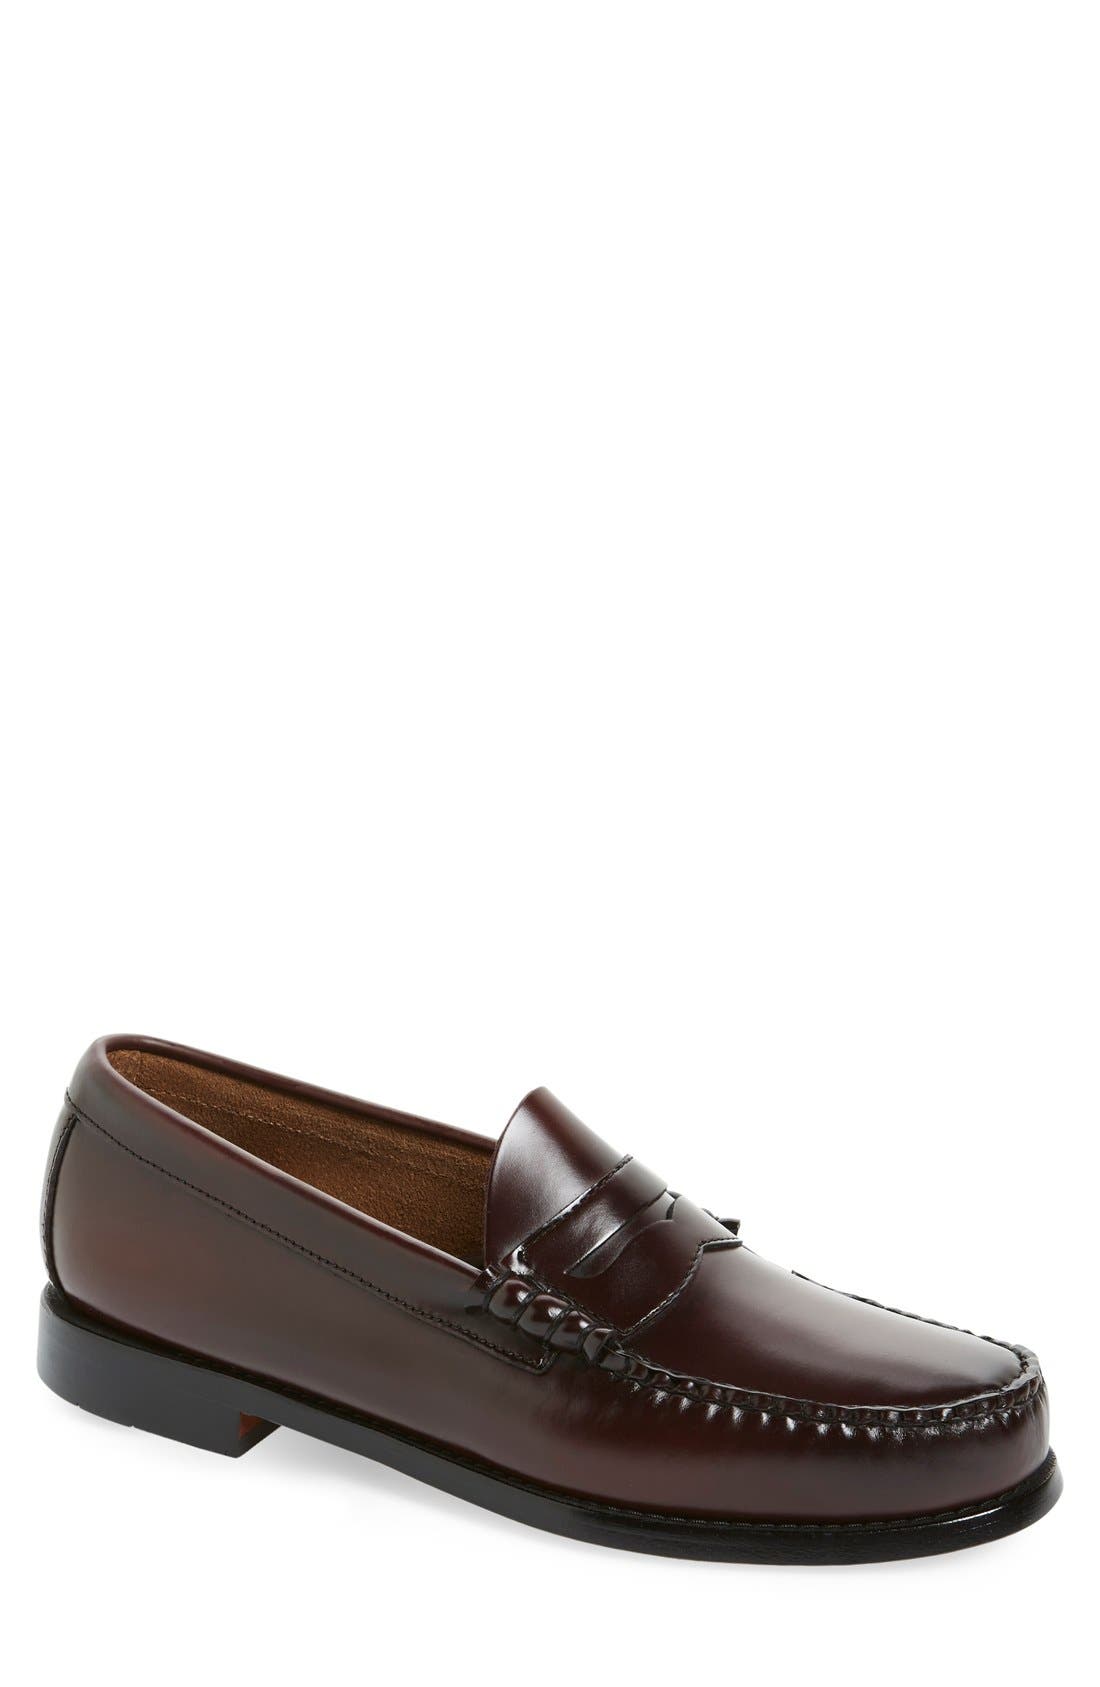 bass weejuns penny loafers for sale